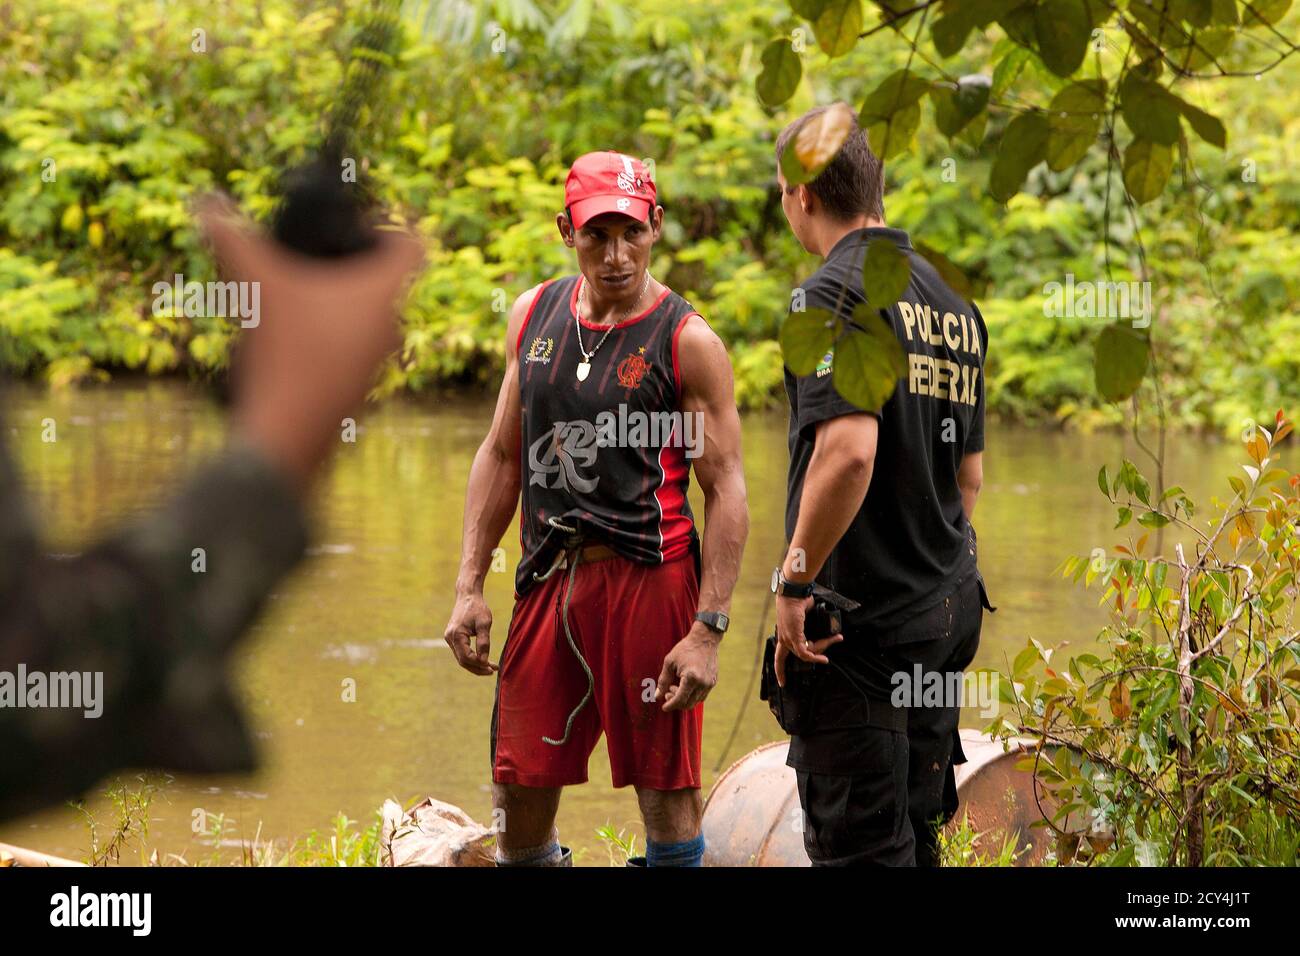 Brazilian Federal Police officers detain a wildcat miner to question him about his activities, during a patrol for drug smugglers and illegal gold mines along the Cassipore River near the border with French Guiana, in this picture taken May 9, 2012. Brazil's Army began Operation Agate with the Federal Police, Customs, the National Aviation Agency, and the government's environmental police force (IBAMA), along a large part of the northern border to combat smuggling and environmental crimes, according to an Army communique. Picture taken May 9, 2012. REUTERS/Paulo Santos (BRAZIL - Tags: MILITARY Stock Photo